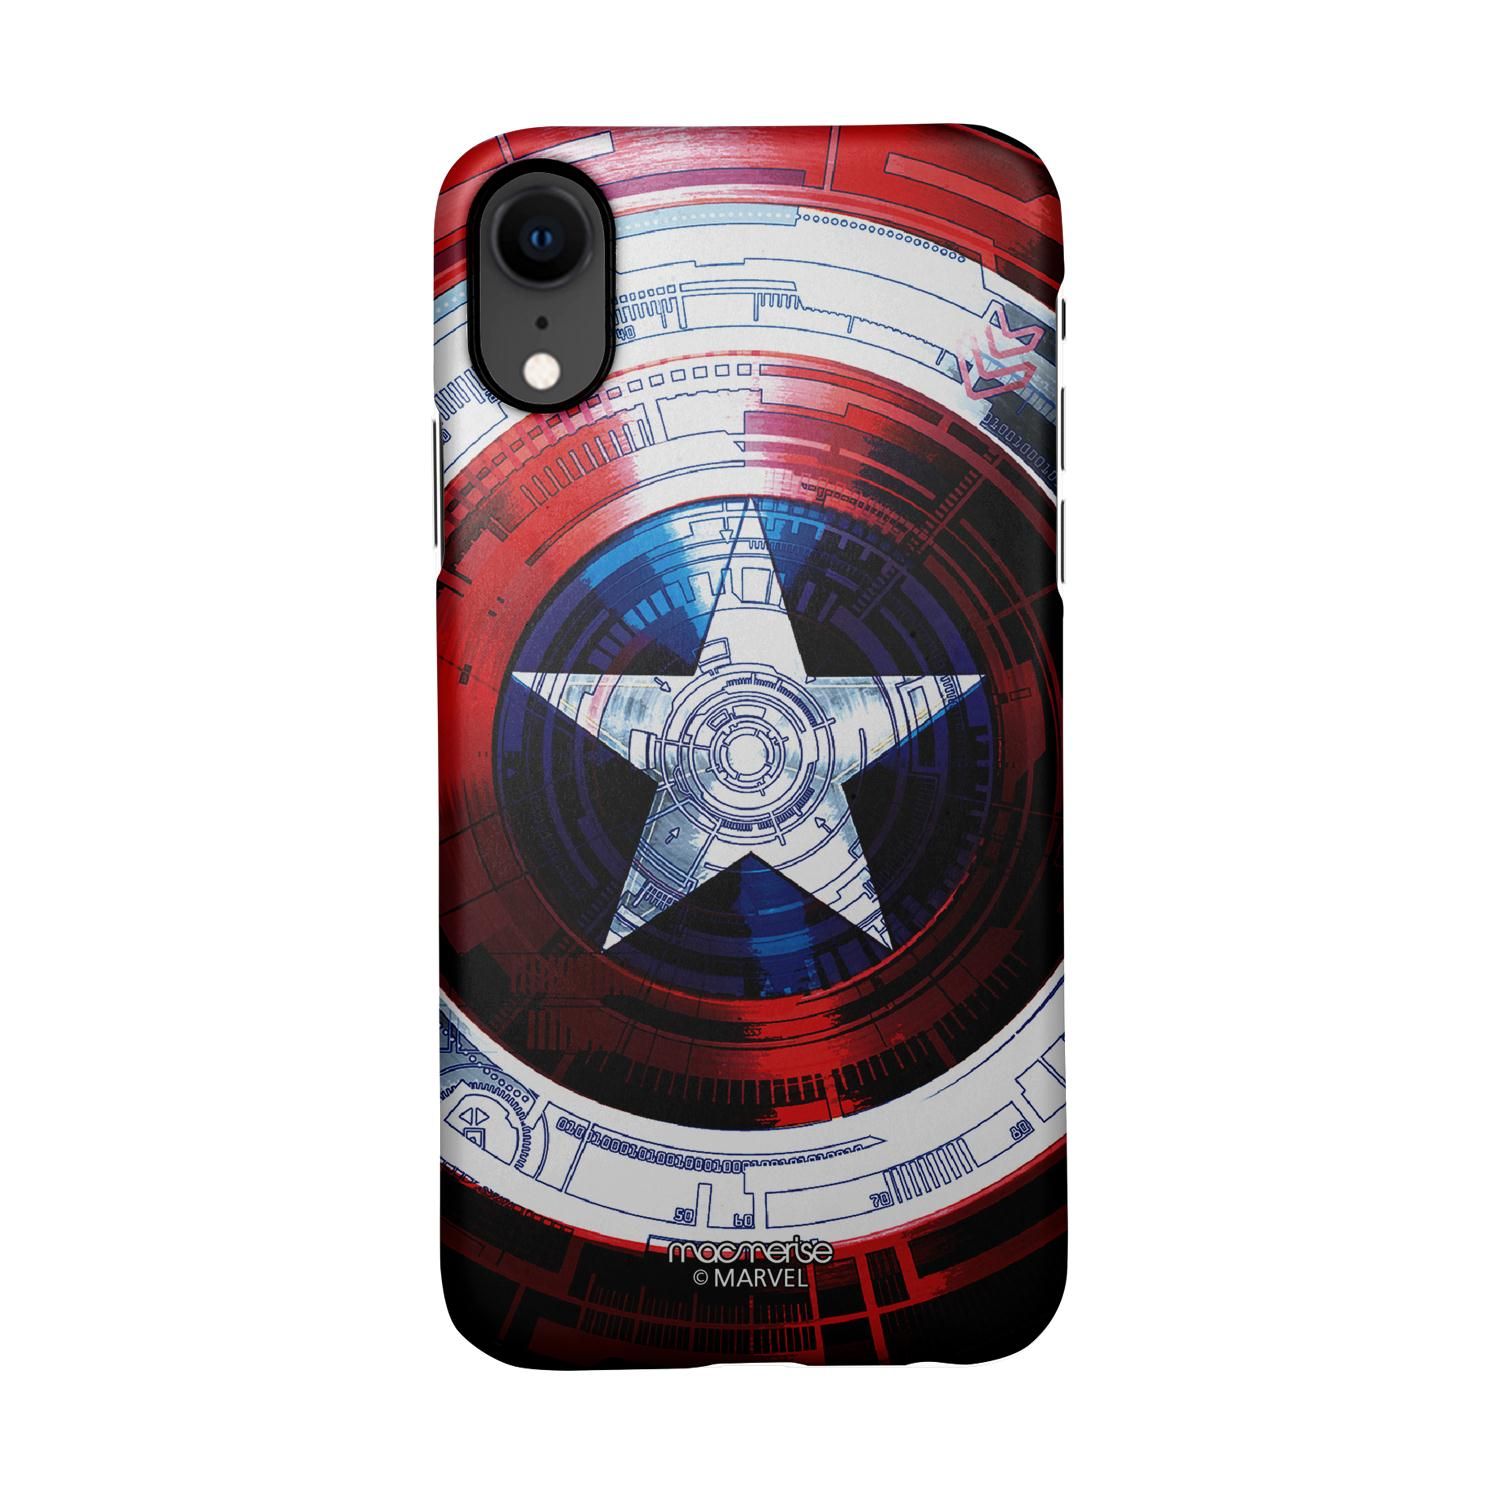 Buy Captains Shield Decoded - Sleek Phone Case for iPhone XR Online